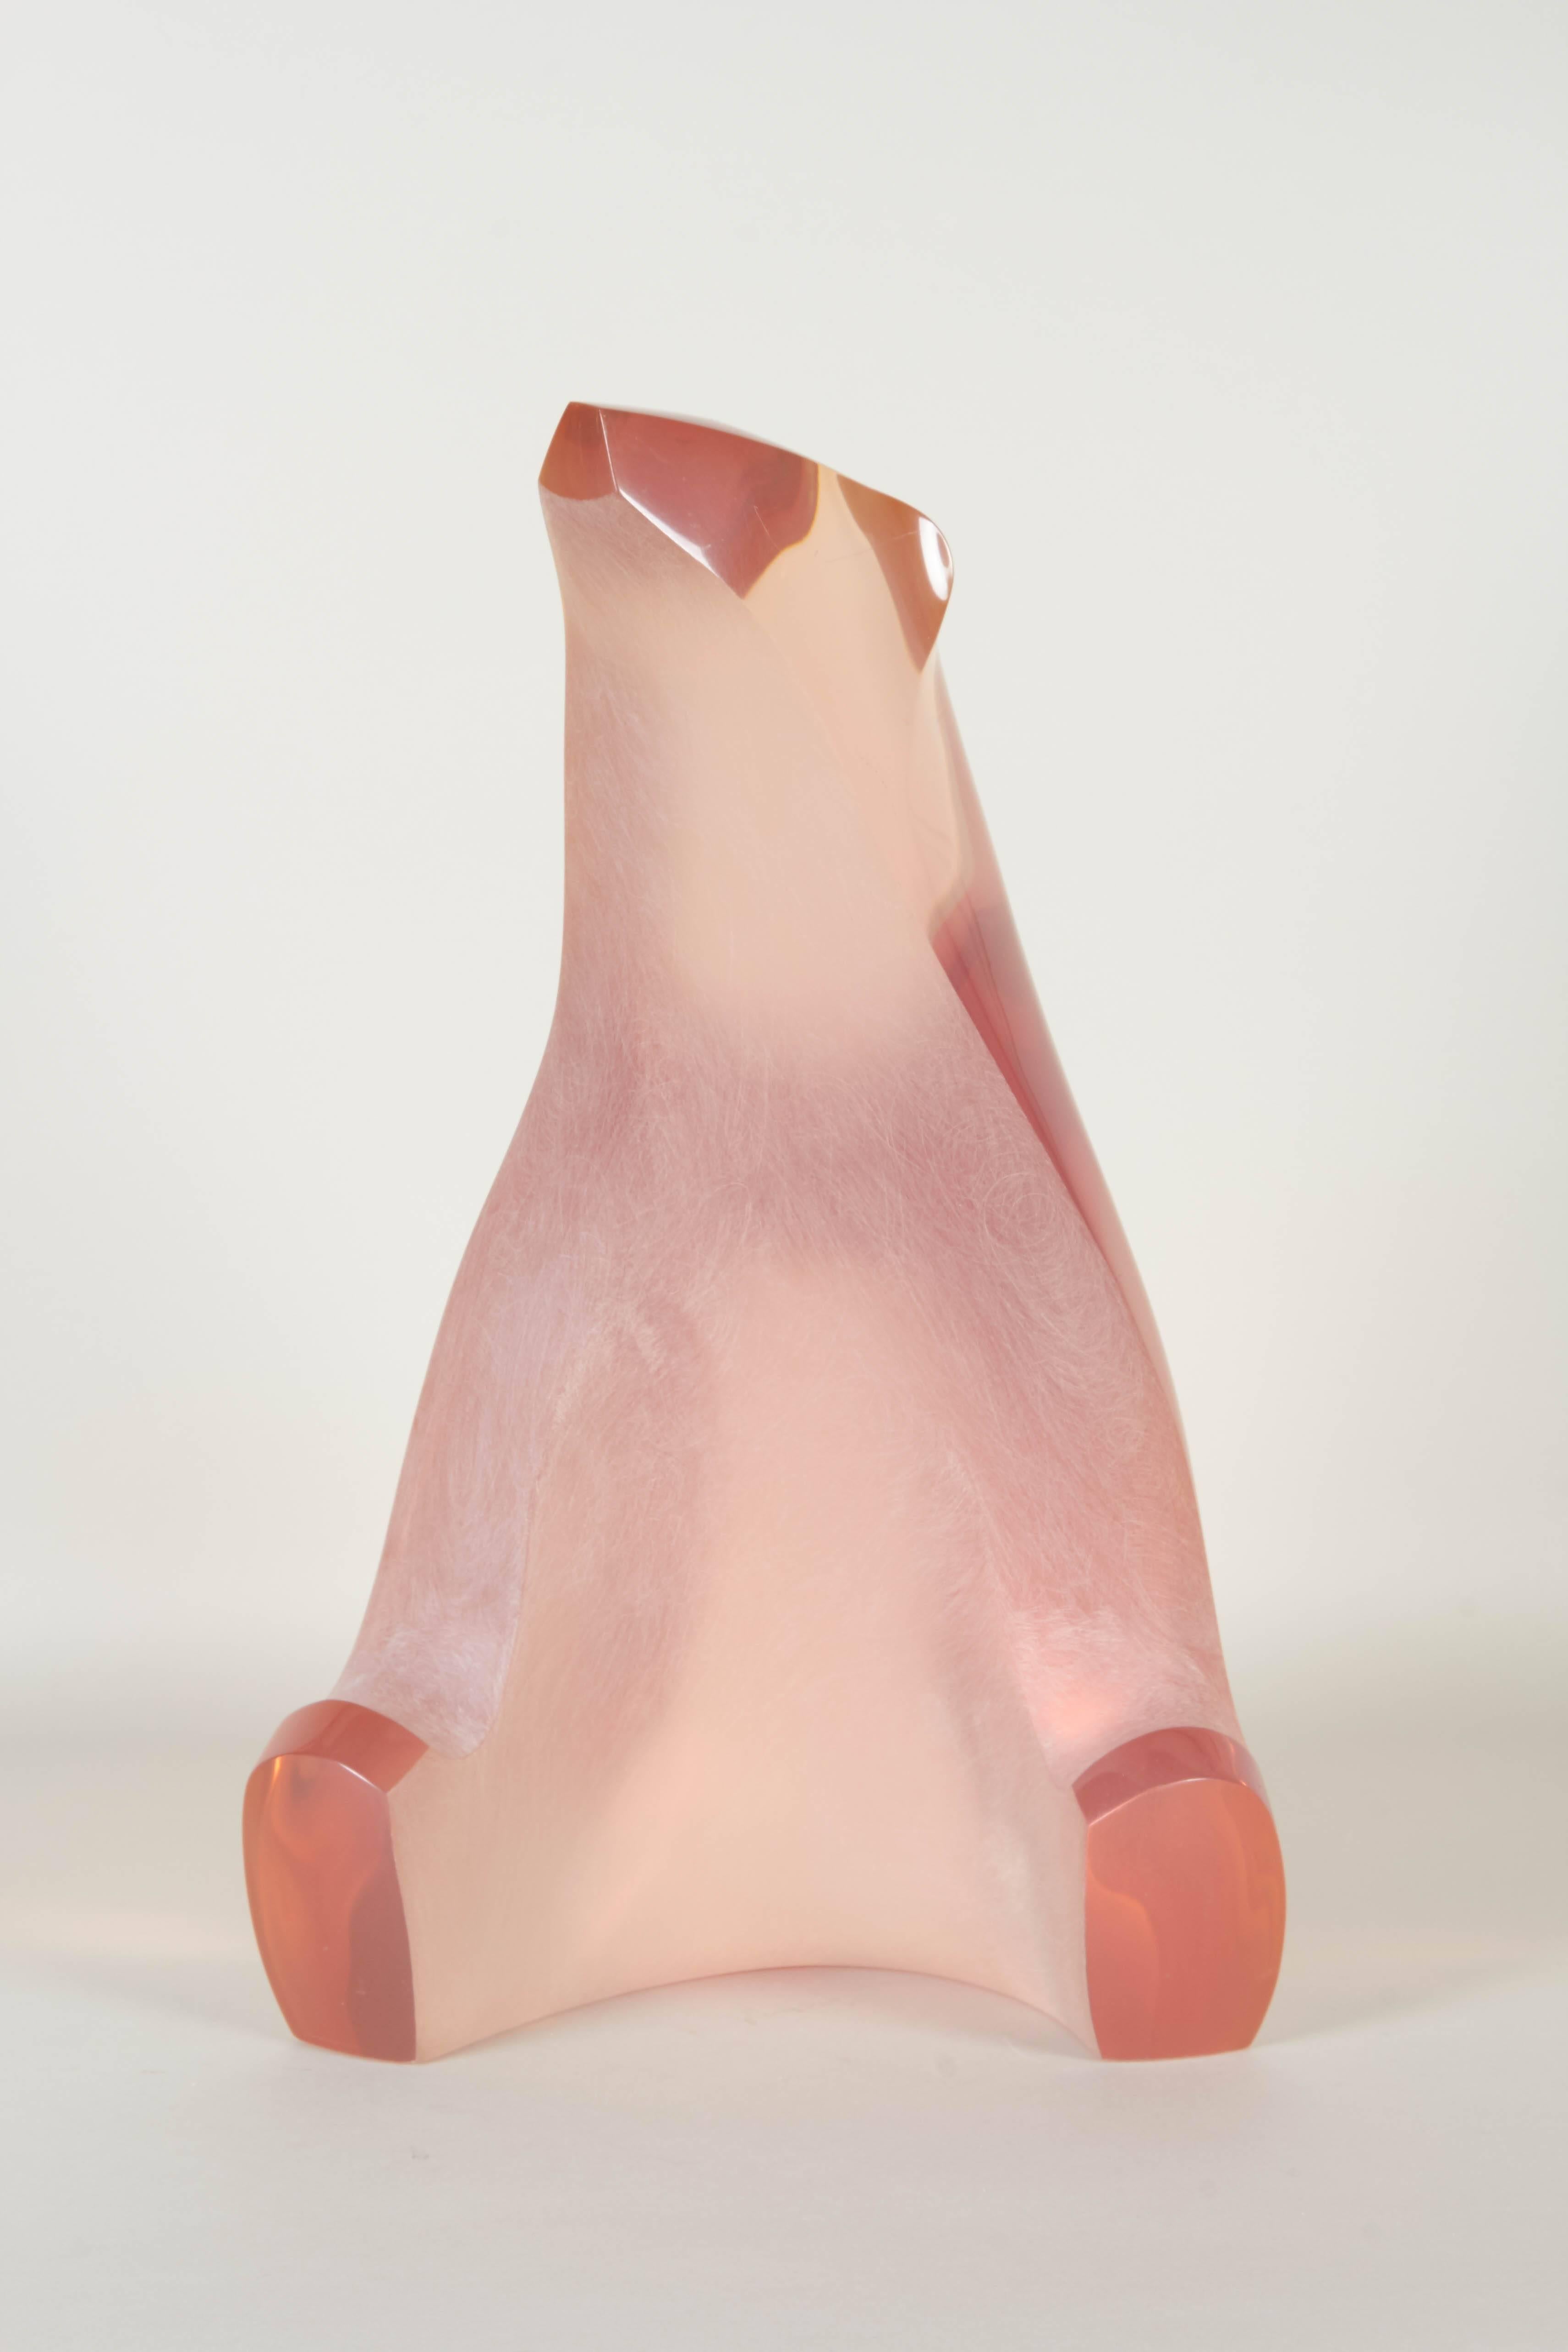 A modern sculpture in pink clear Lucite by artist Louis Von Koelnau, with etched detail to the front, depicting a seated bear. Markings include [© Louis Von Koelnau 1989/No. 85 of 200], signed to the foot. Excellent condition, with minor presence of